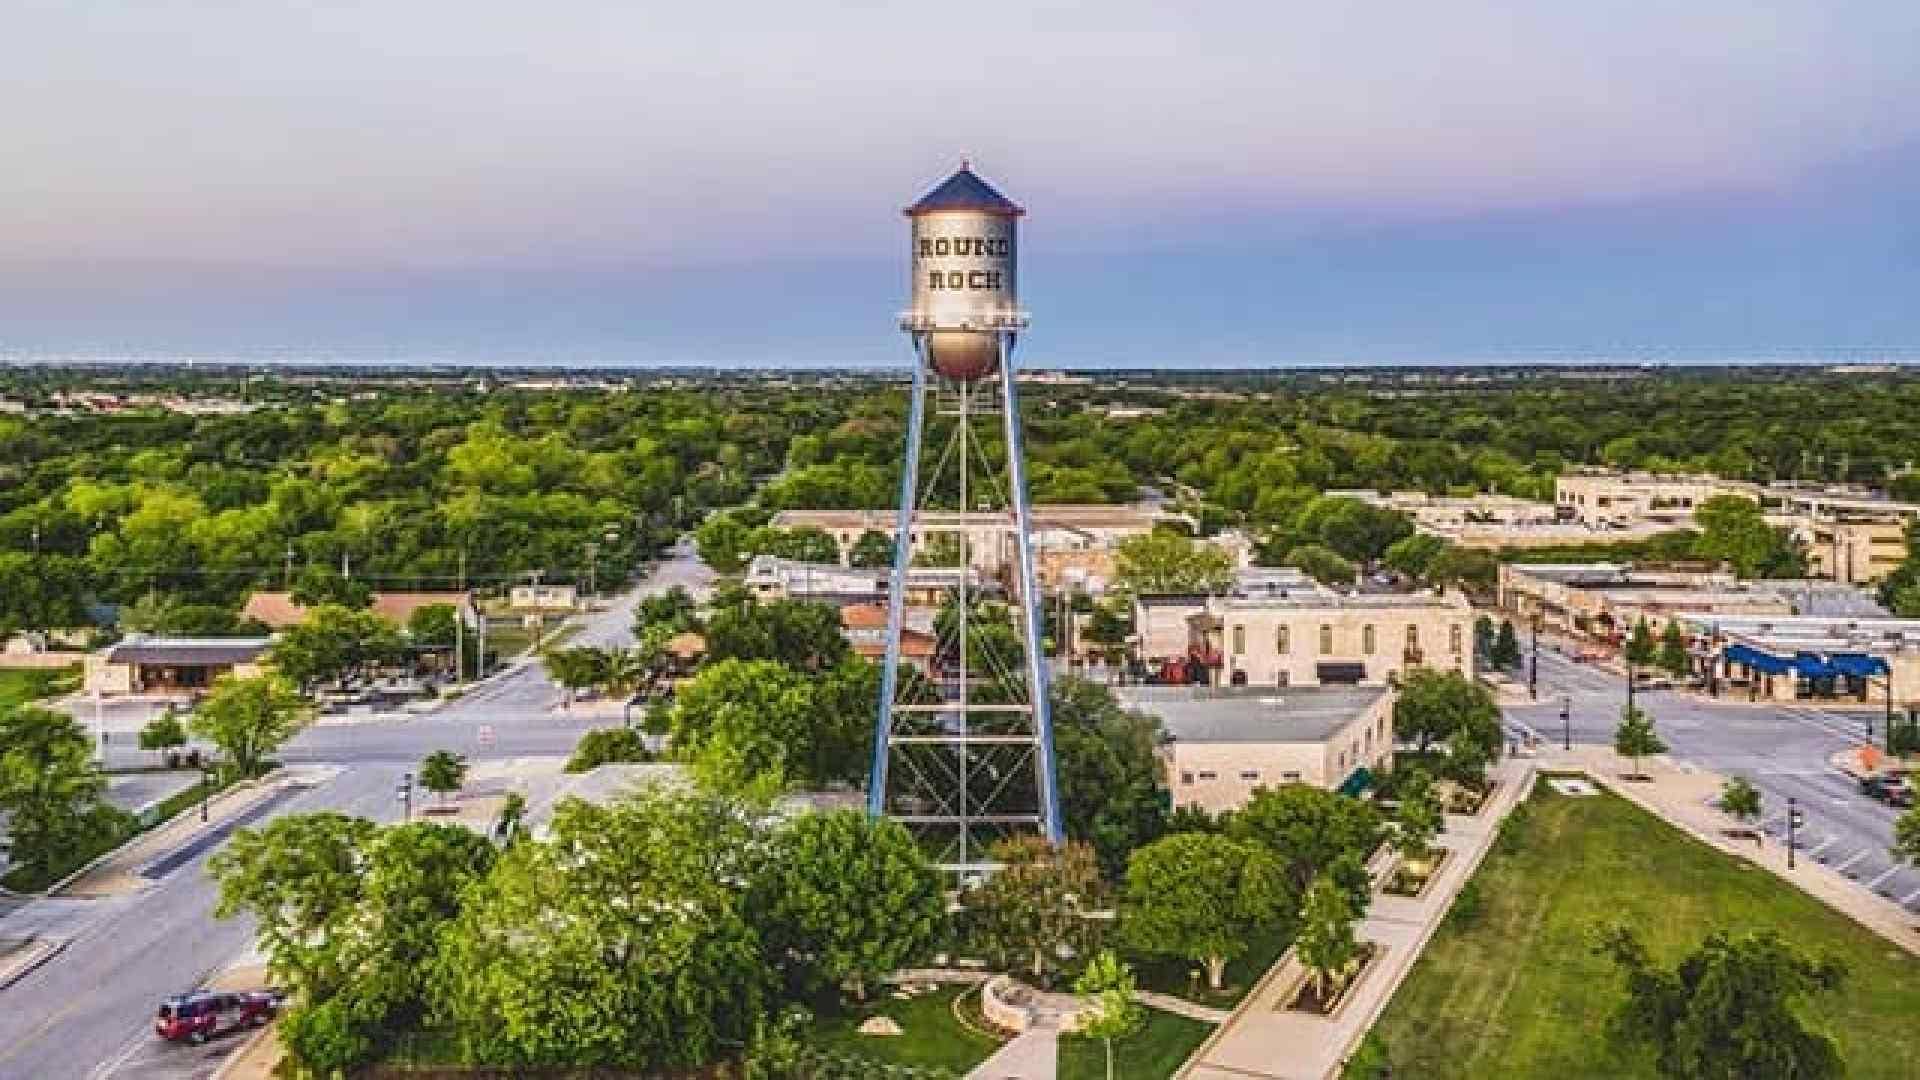 Water tower park in Round Rock Texas